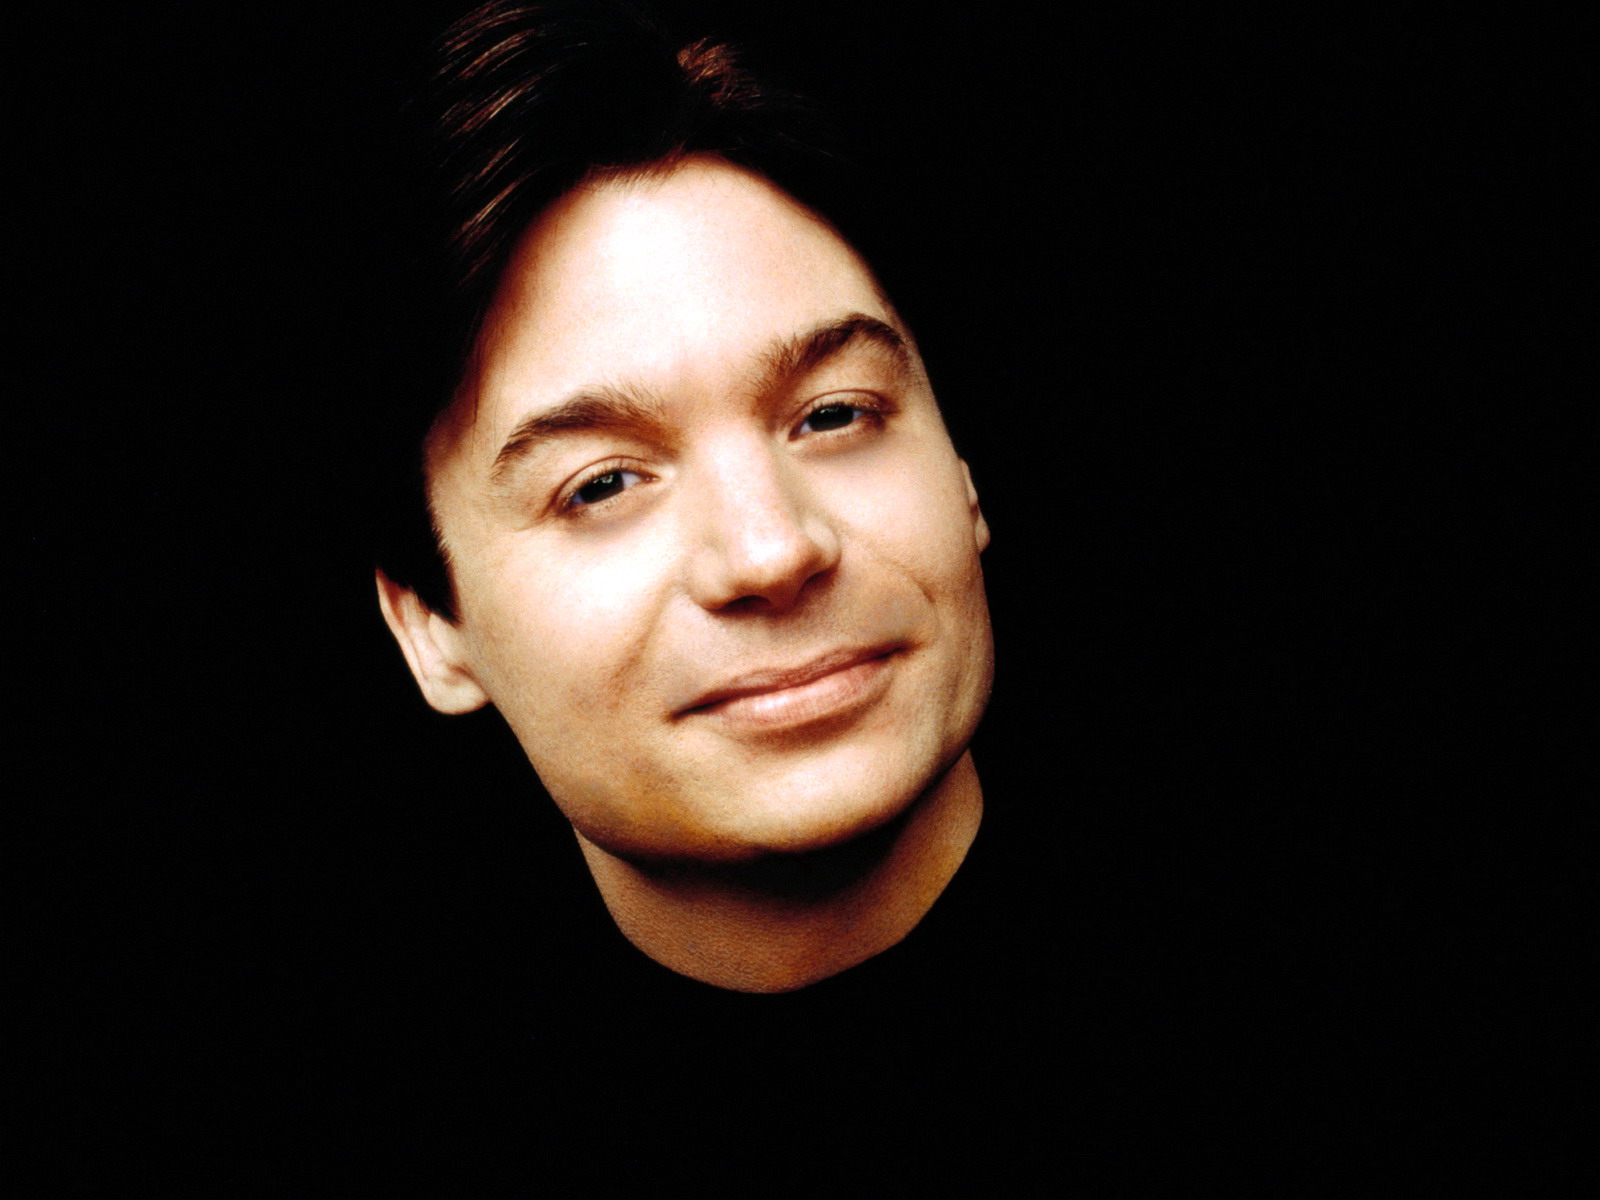 mike-myers-2015